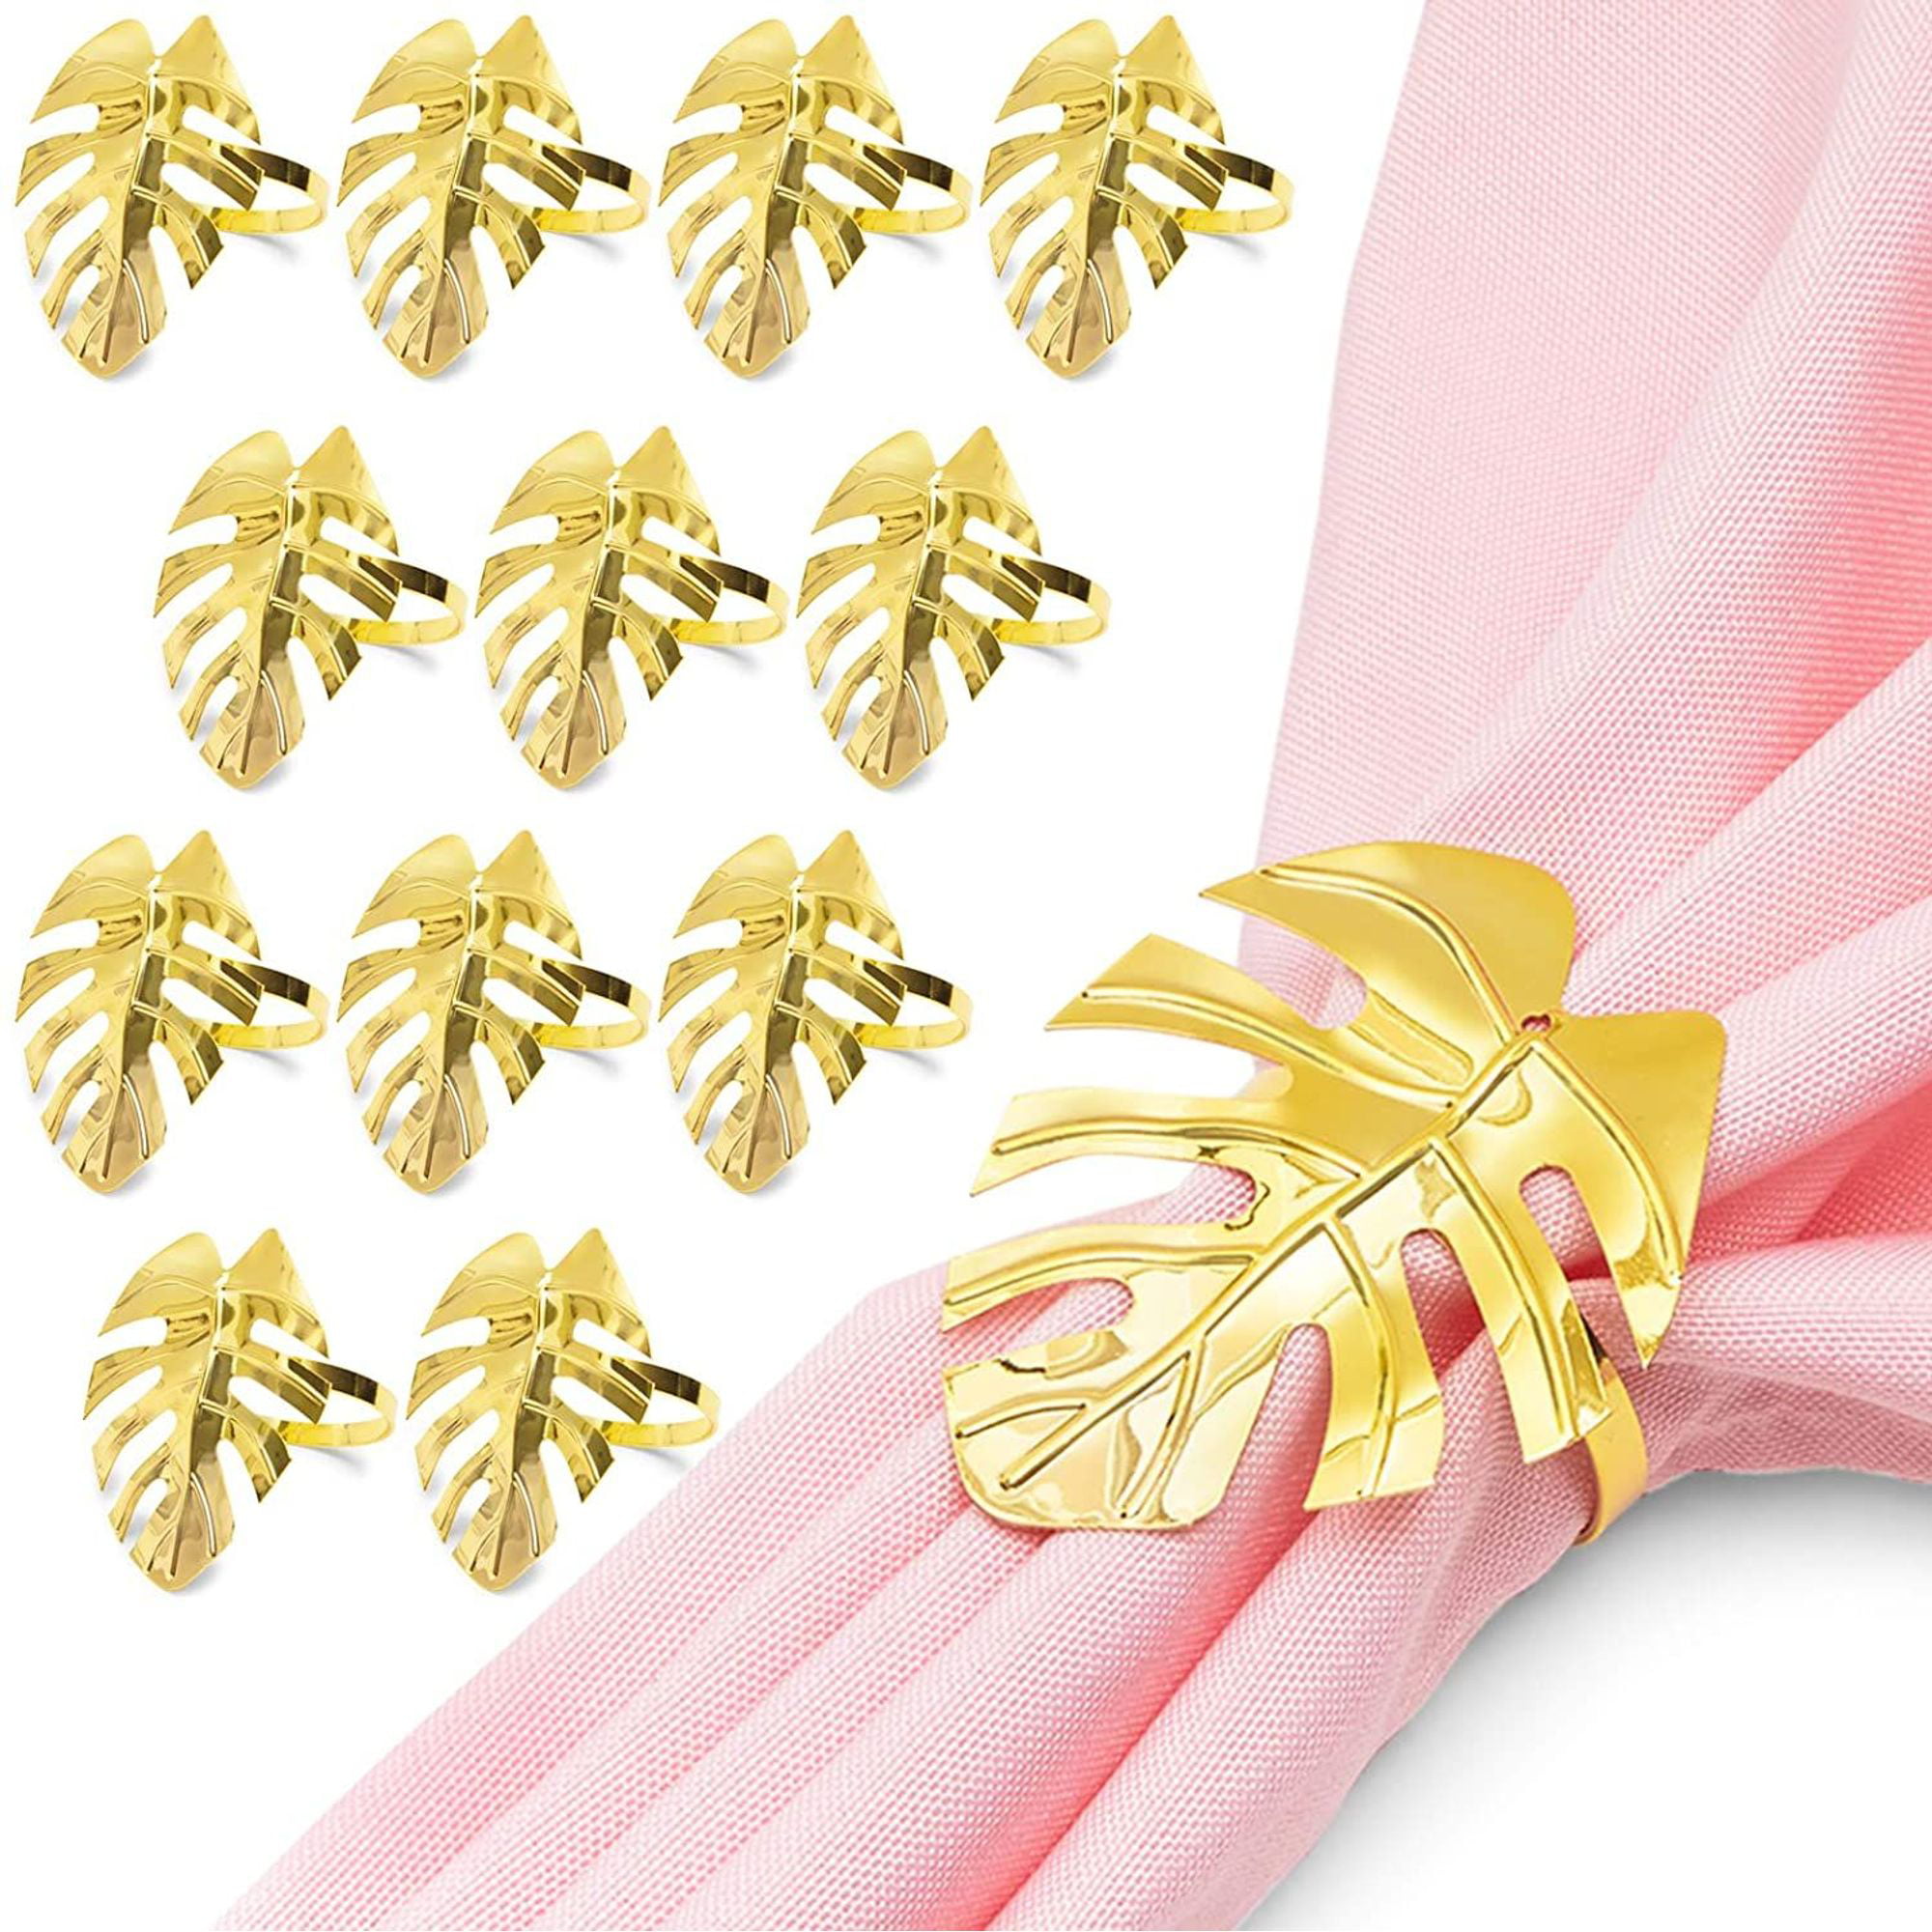 Gold/Silver Round Leaf Napkin Rings Set of 6-12 Holder for Dining Table Parties